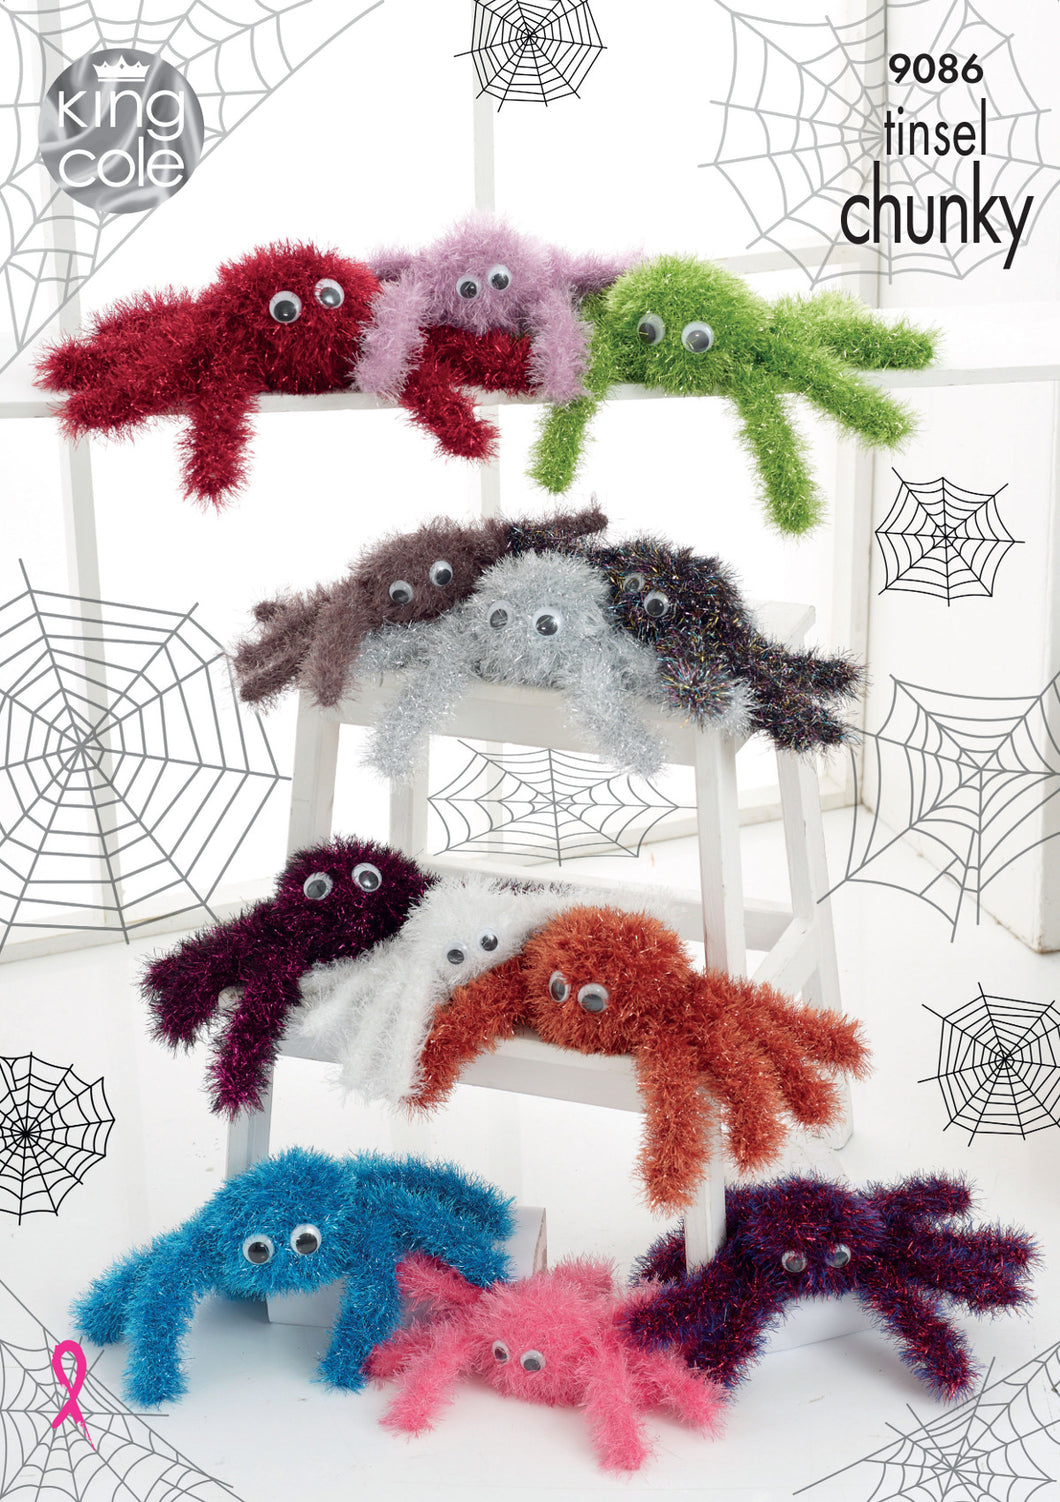 King Cole Tinsel Chunky Knitting Pattern - Spiders (9086)